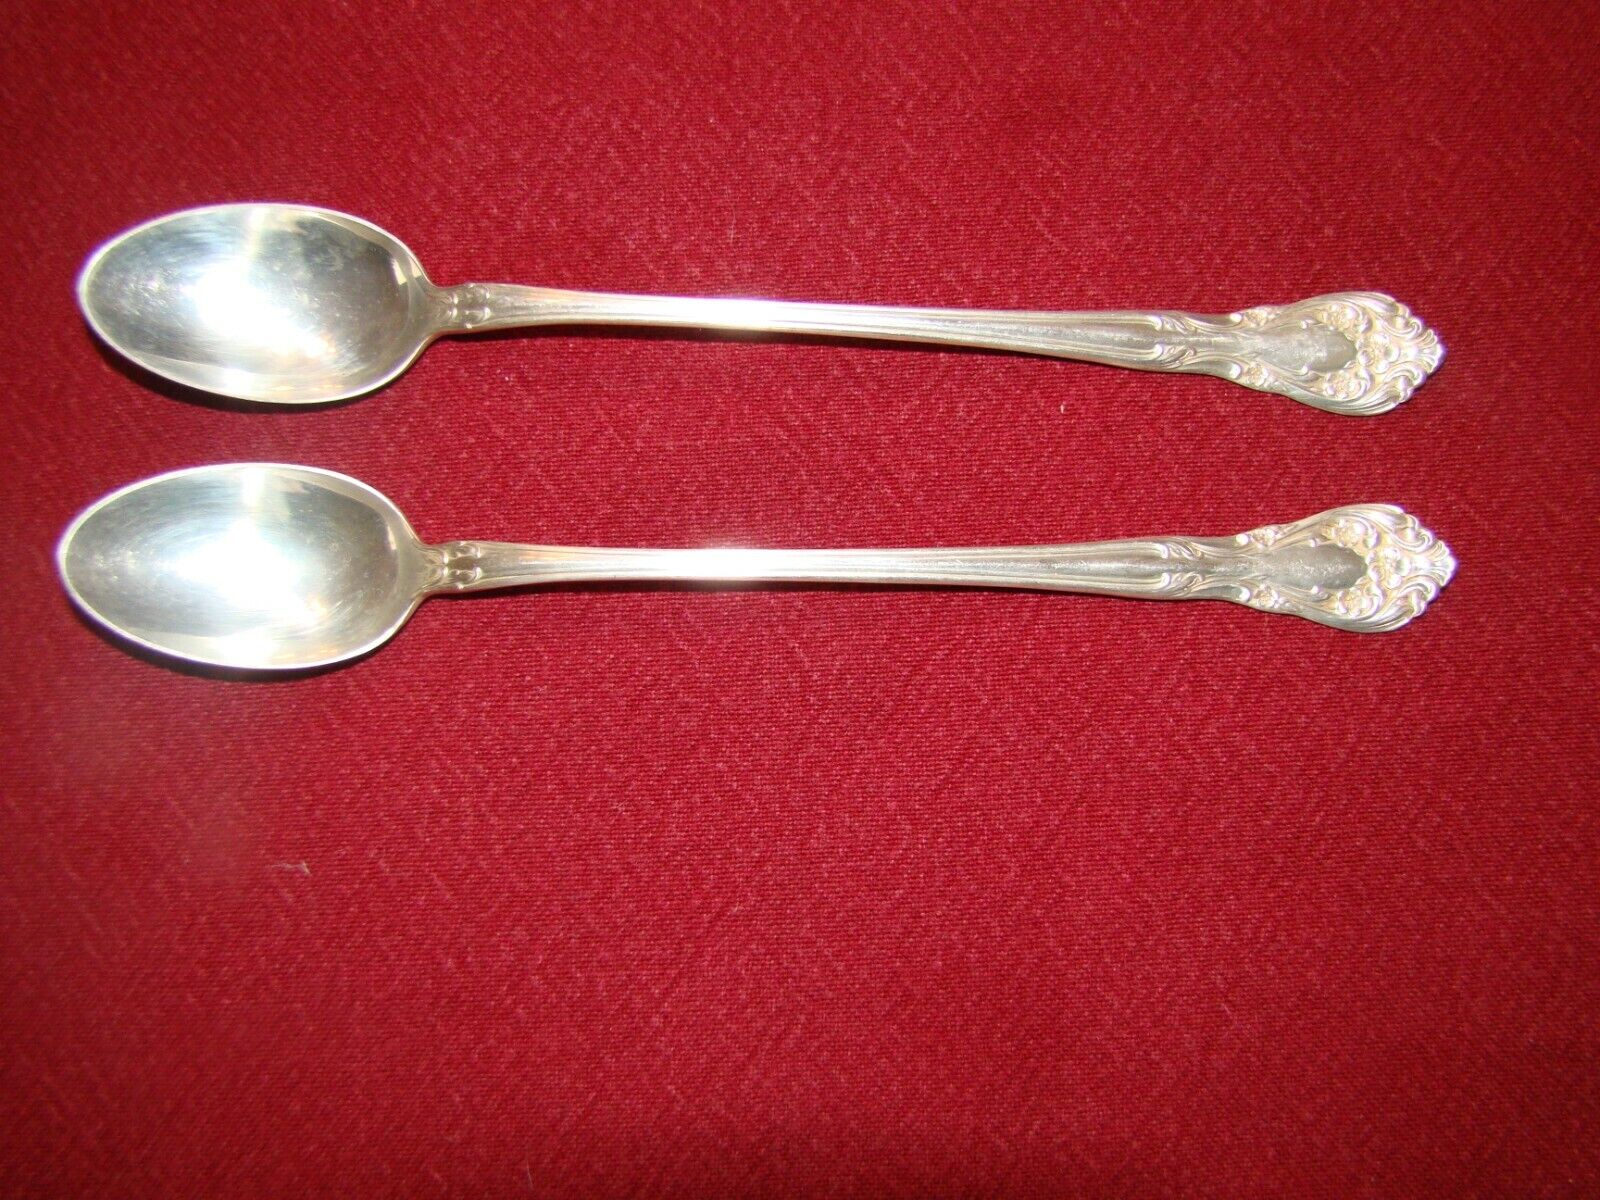 LOT OF 2 ALVIN CHATEAU ROSE STERLING SILVER ICED TEA SPOON  NO MONOGRAM